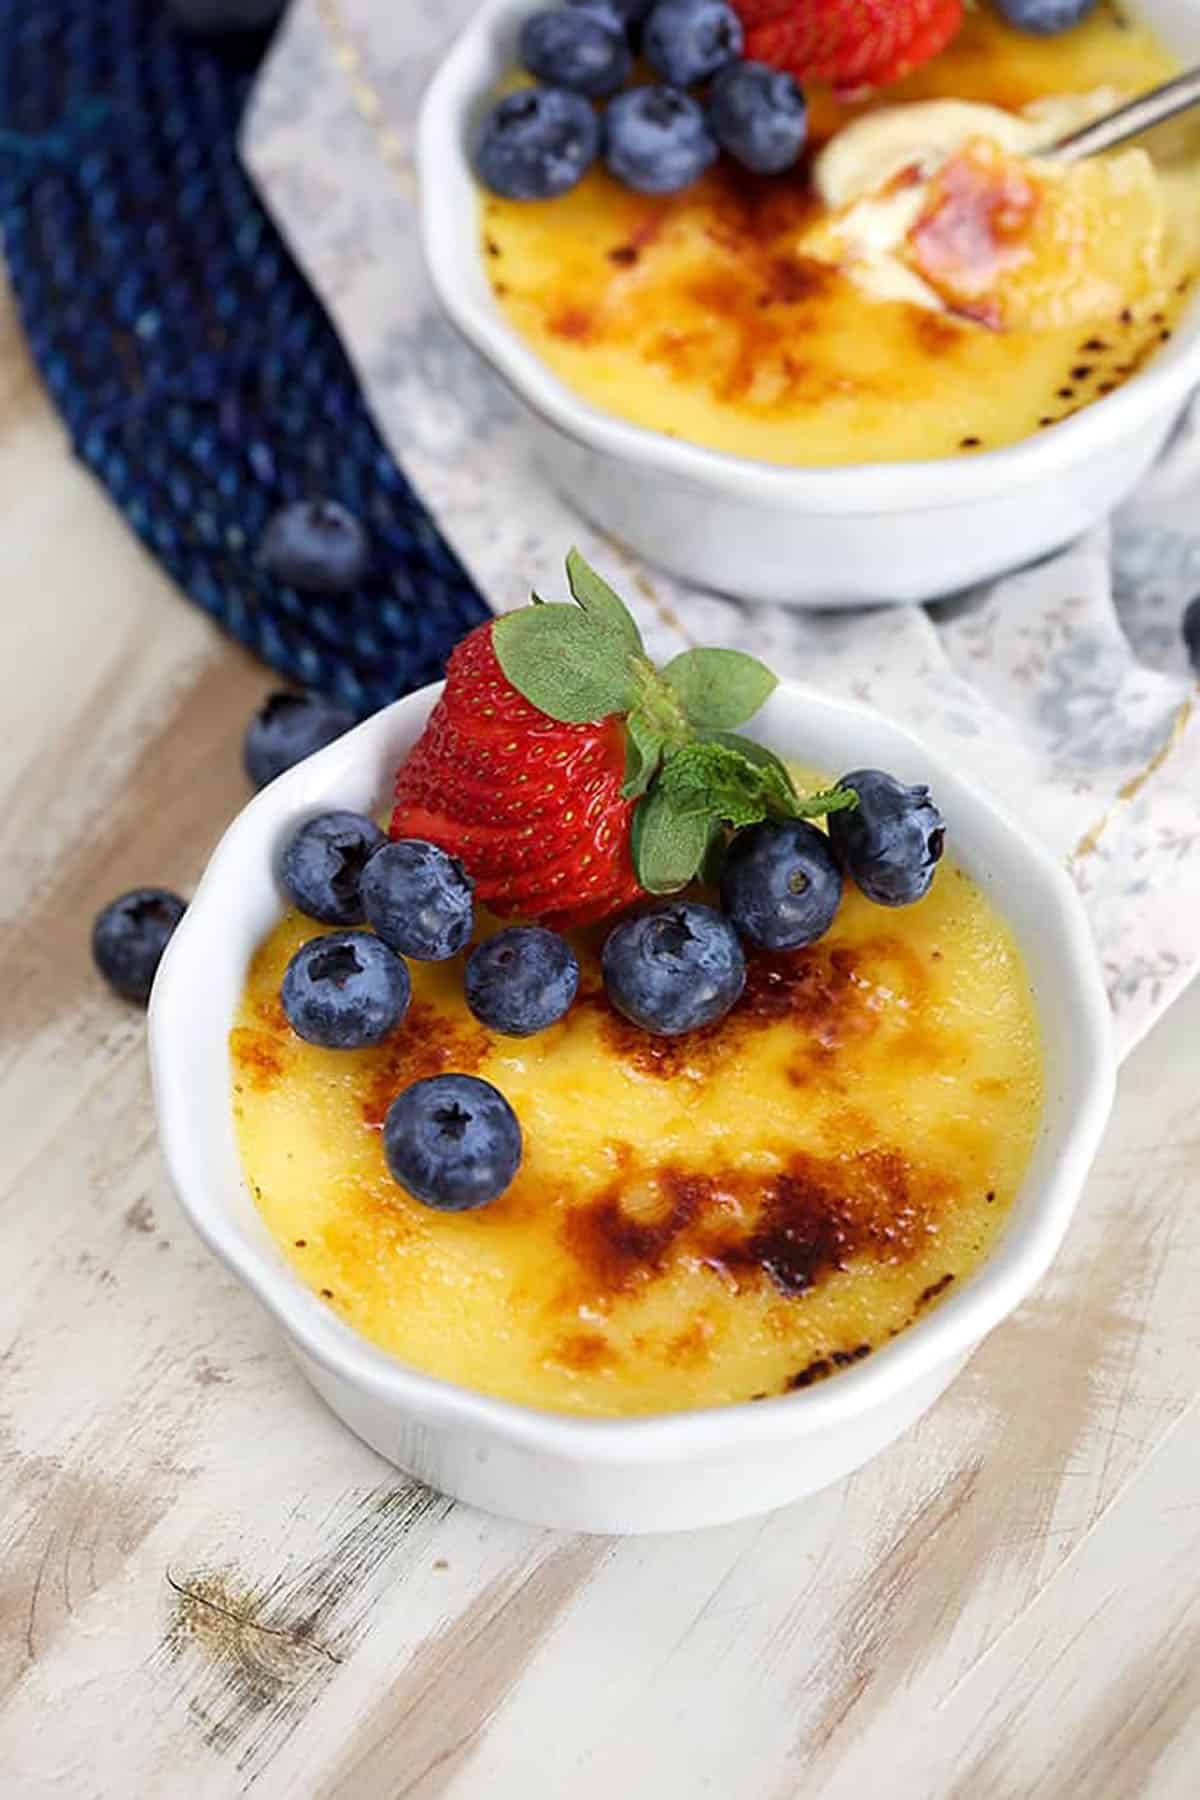 Creme brûlée in a white ramekin with blueberries and a strawberry on top.